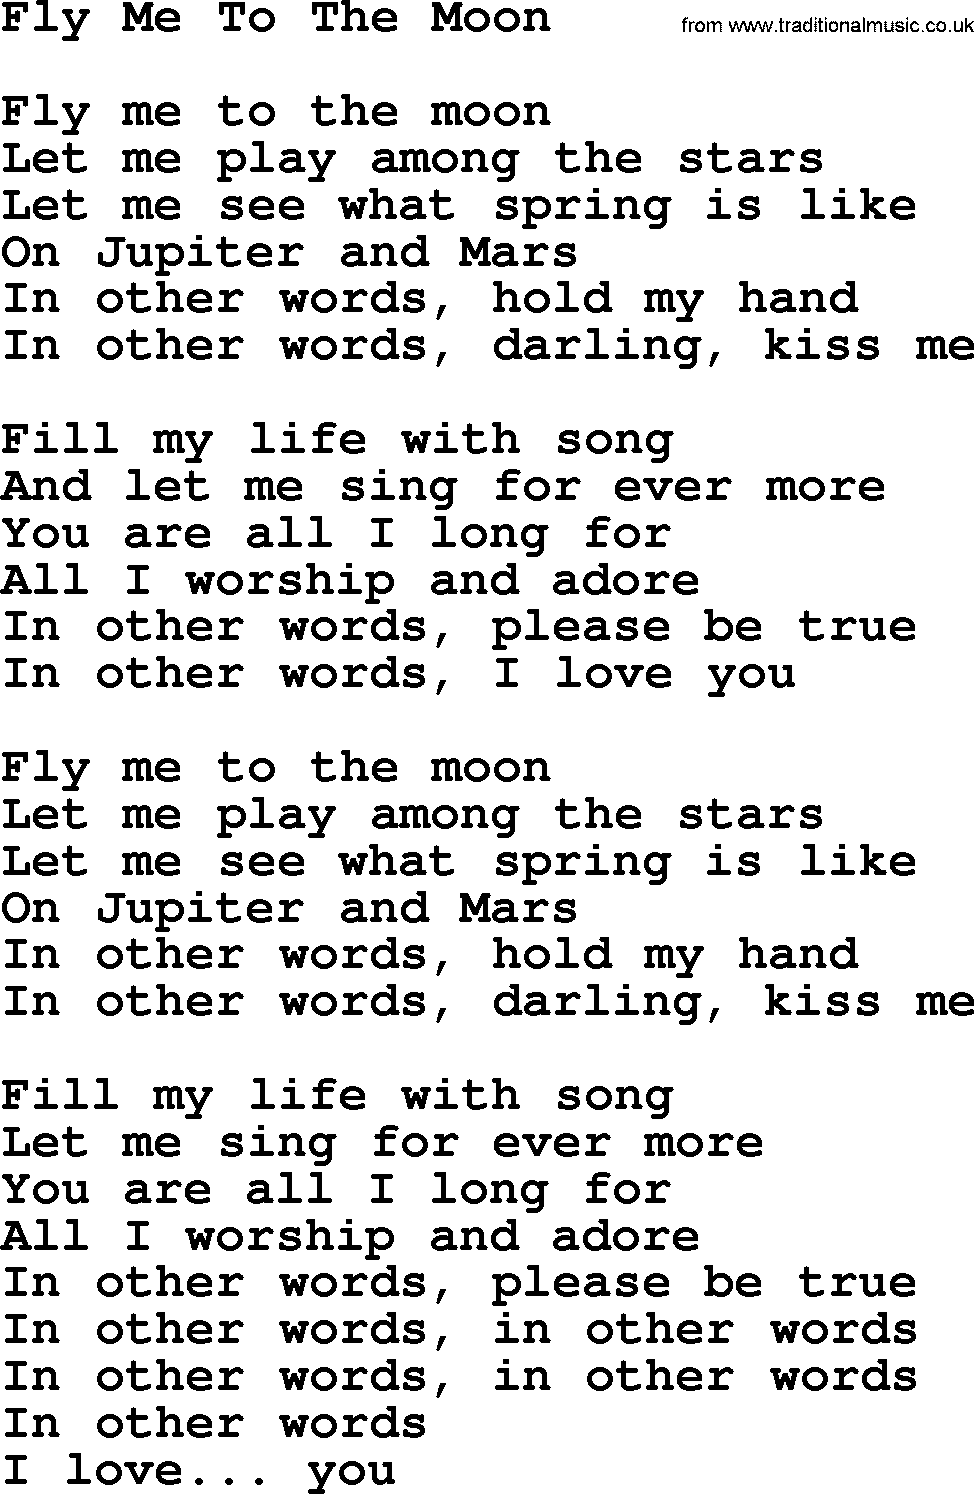 Willie Nelson song: Fly Me To The Moon lyrics